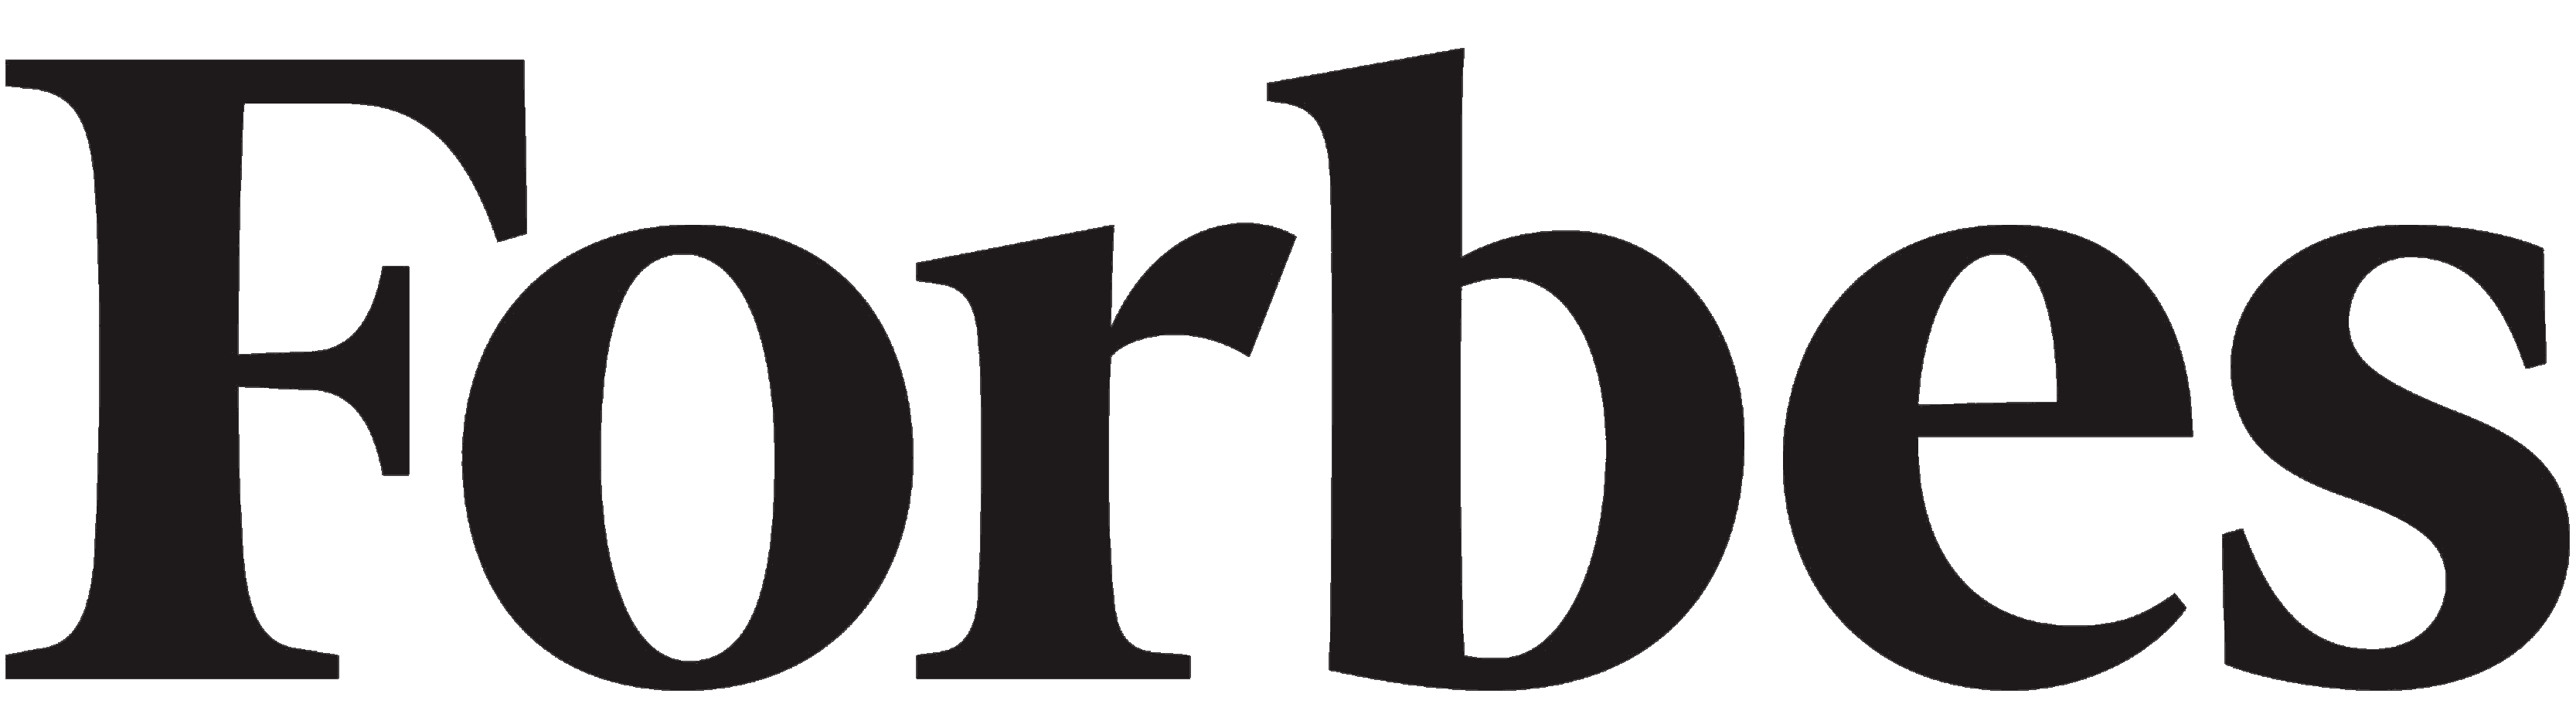 Forbes Logo Png Download - 64